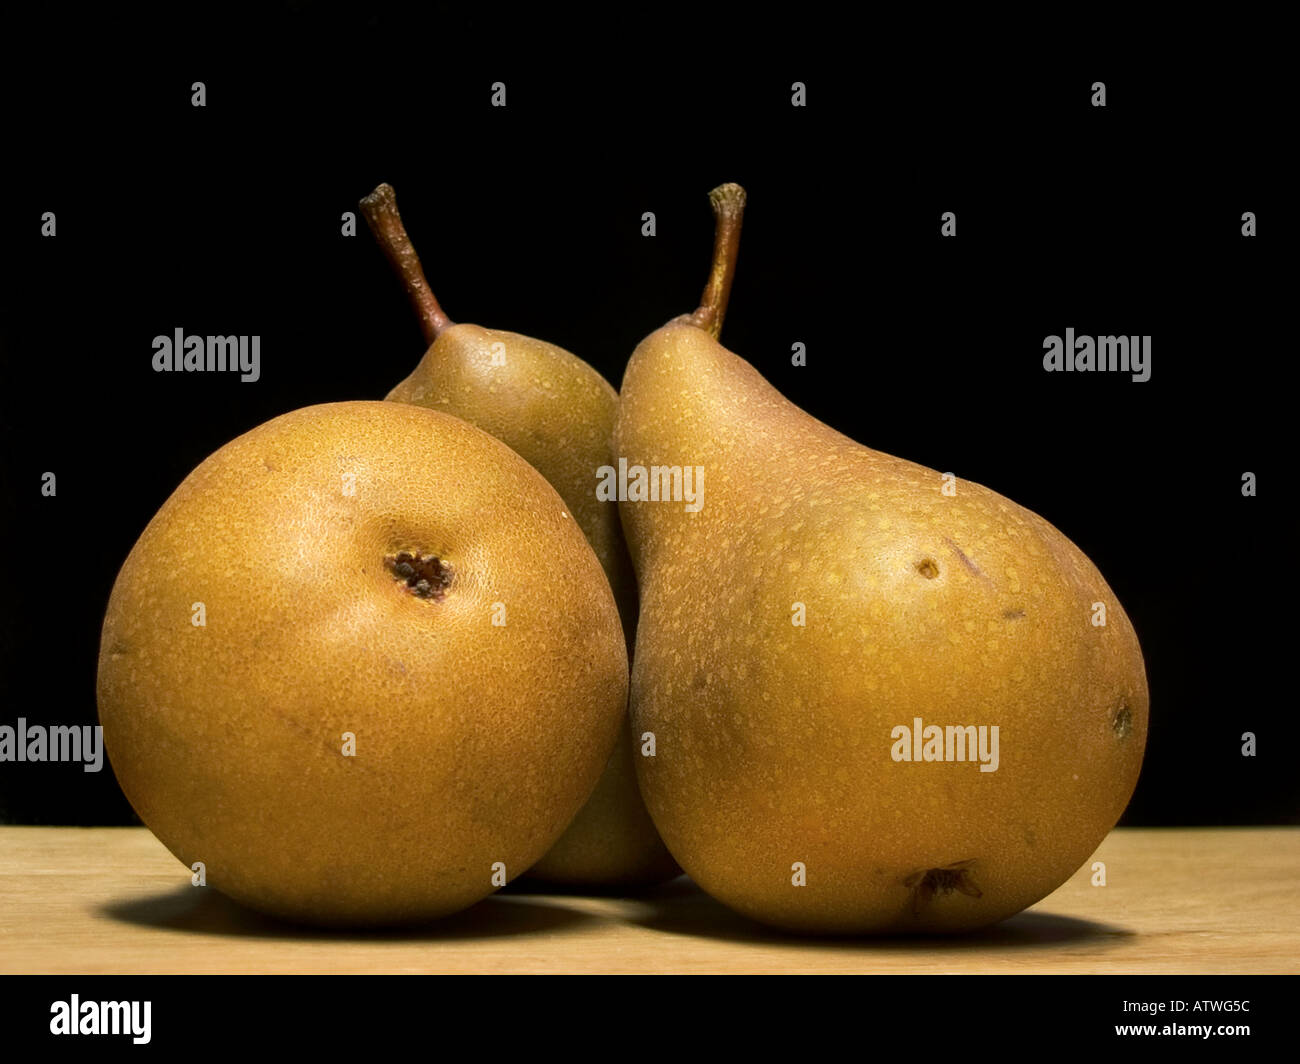 Still life image showing 3 bosc pears in warm light on a wooden table with a dark black background. Stock Photo